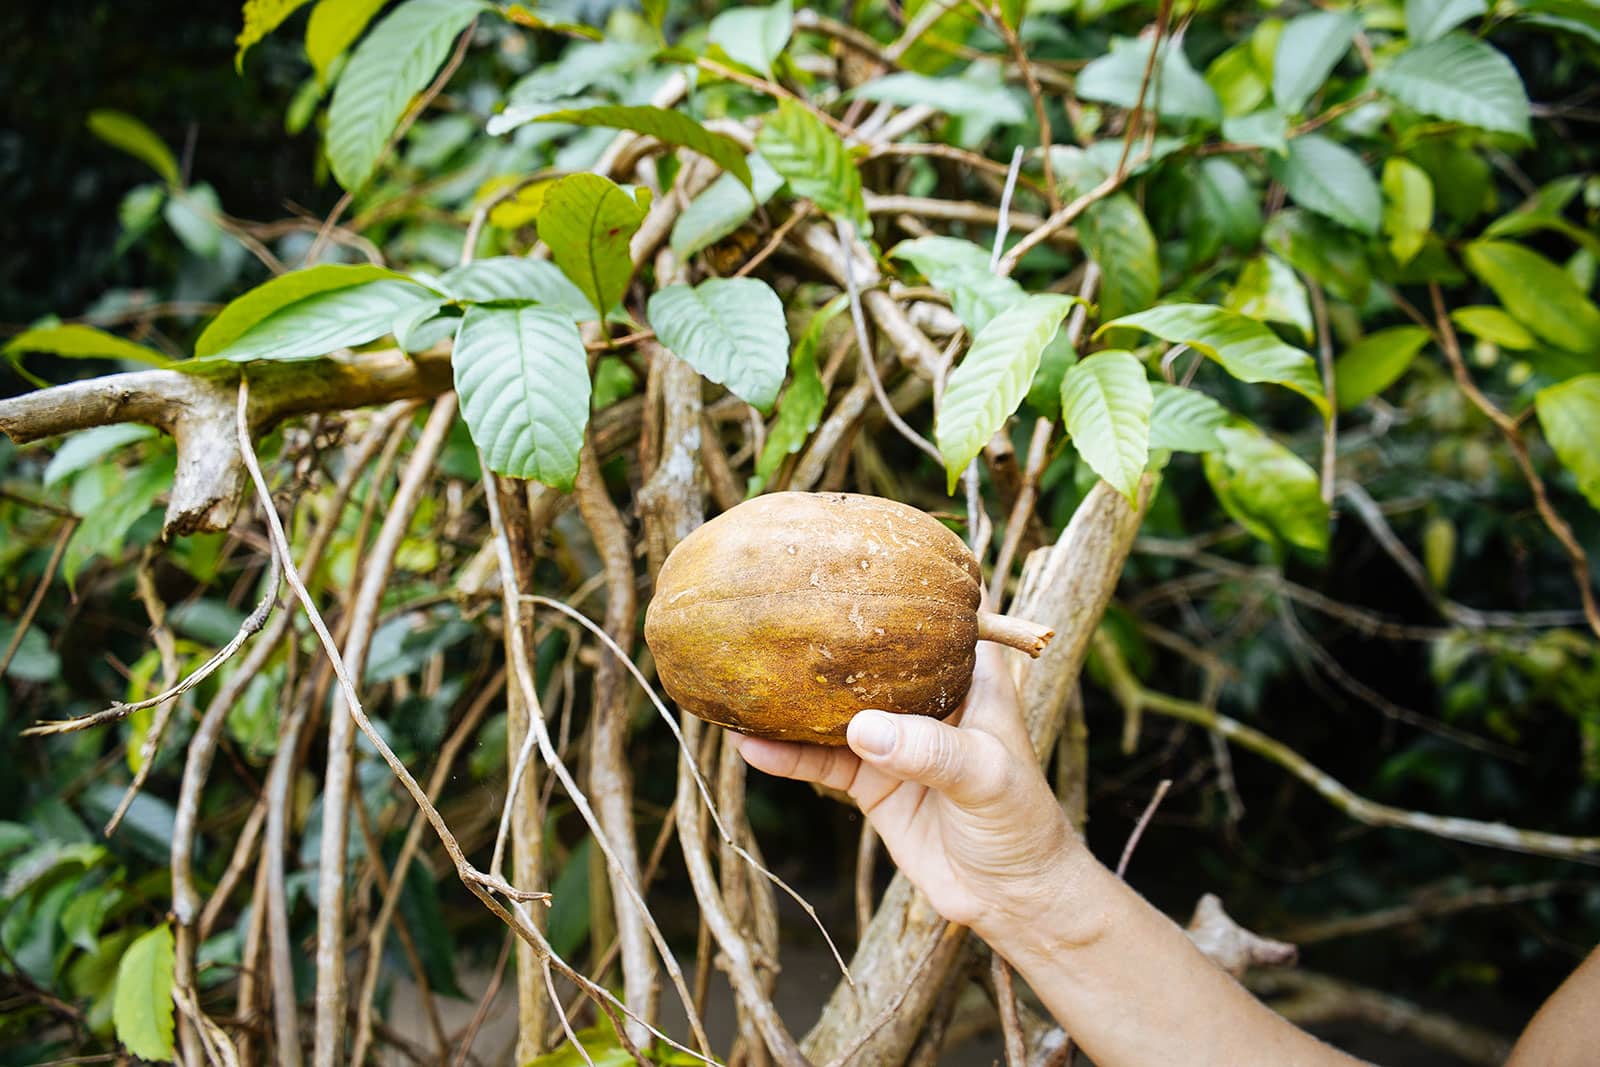 Hand holding a Pachira aquatica fruit next to a money tree in the wild